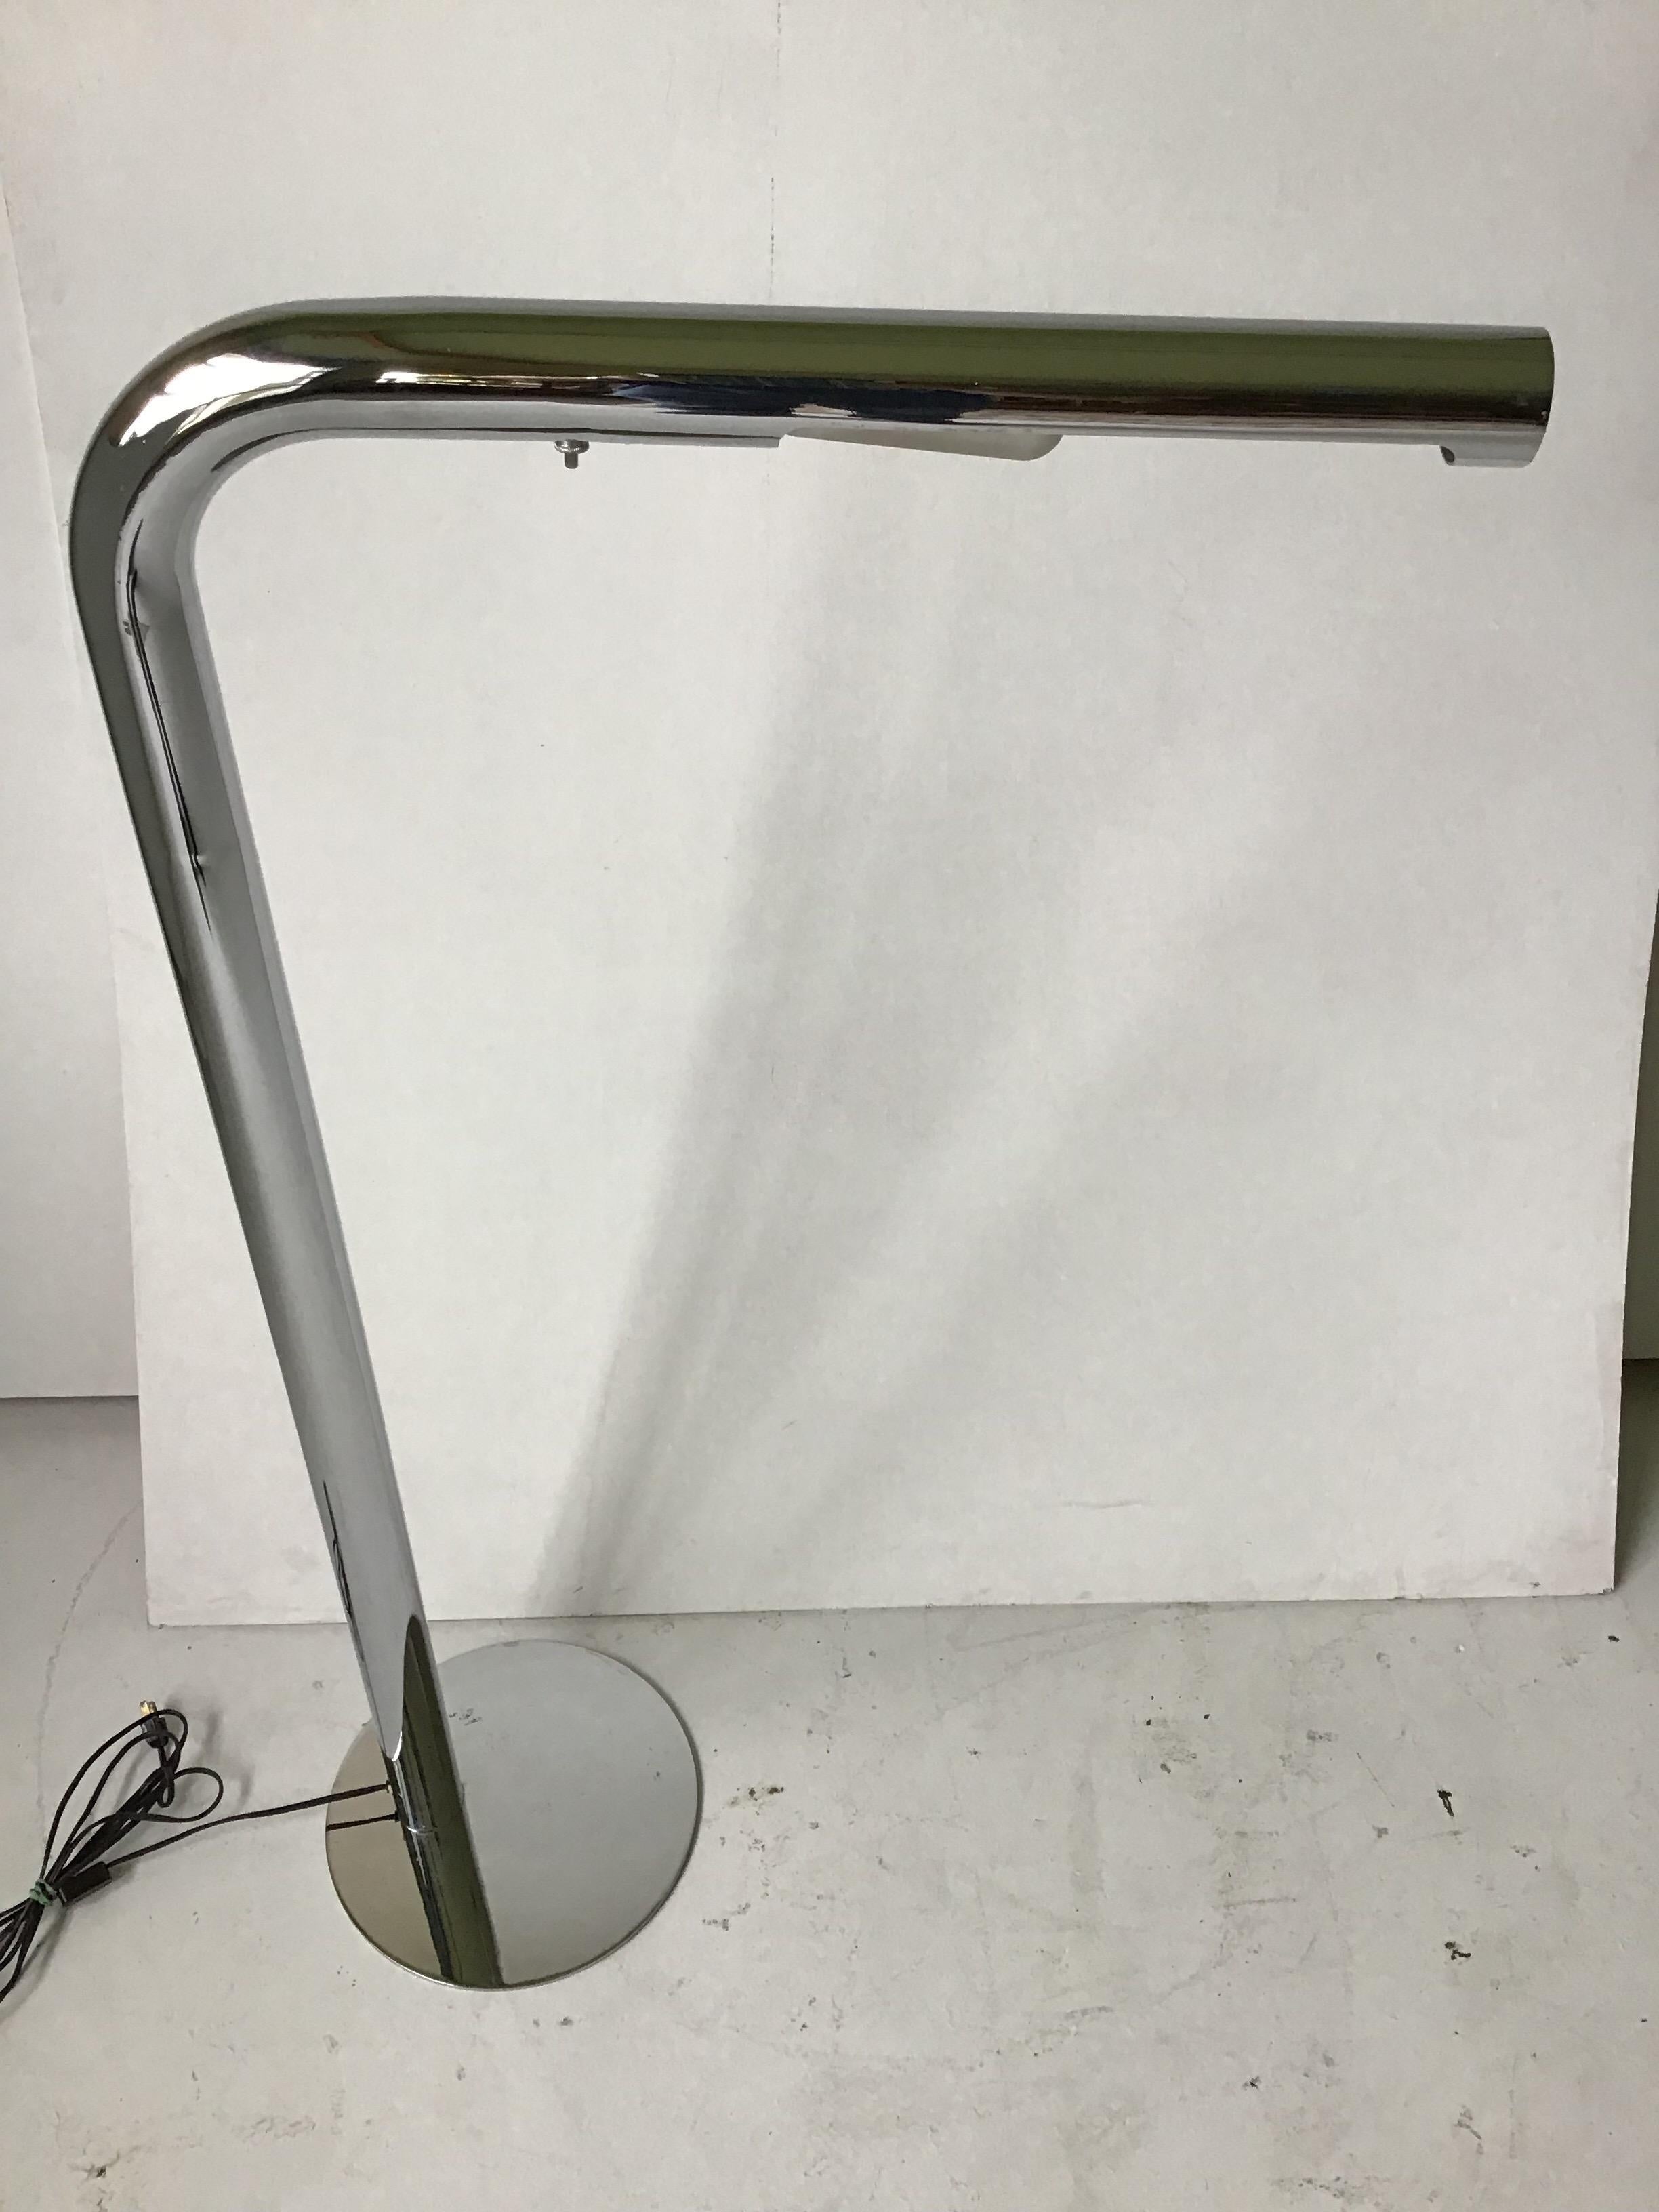 Signed Sonneman. Incredible, simplistic form! It is a chrome tube, bent with horizontal lamp housing. 1970s space age.